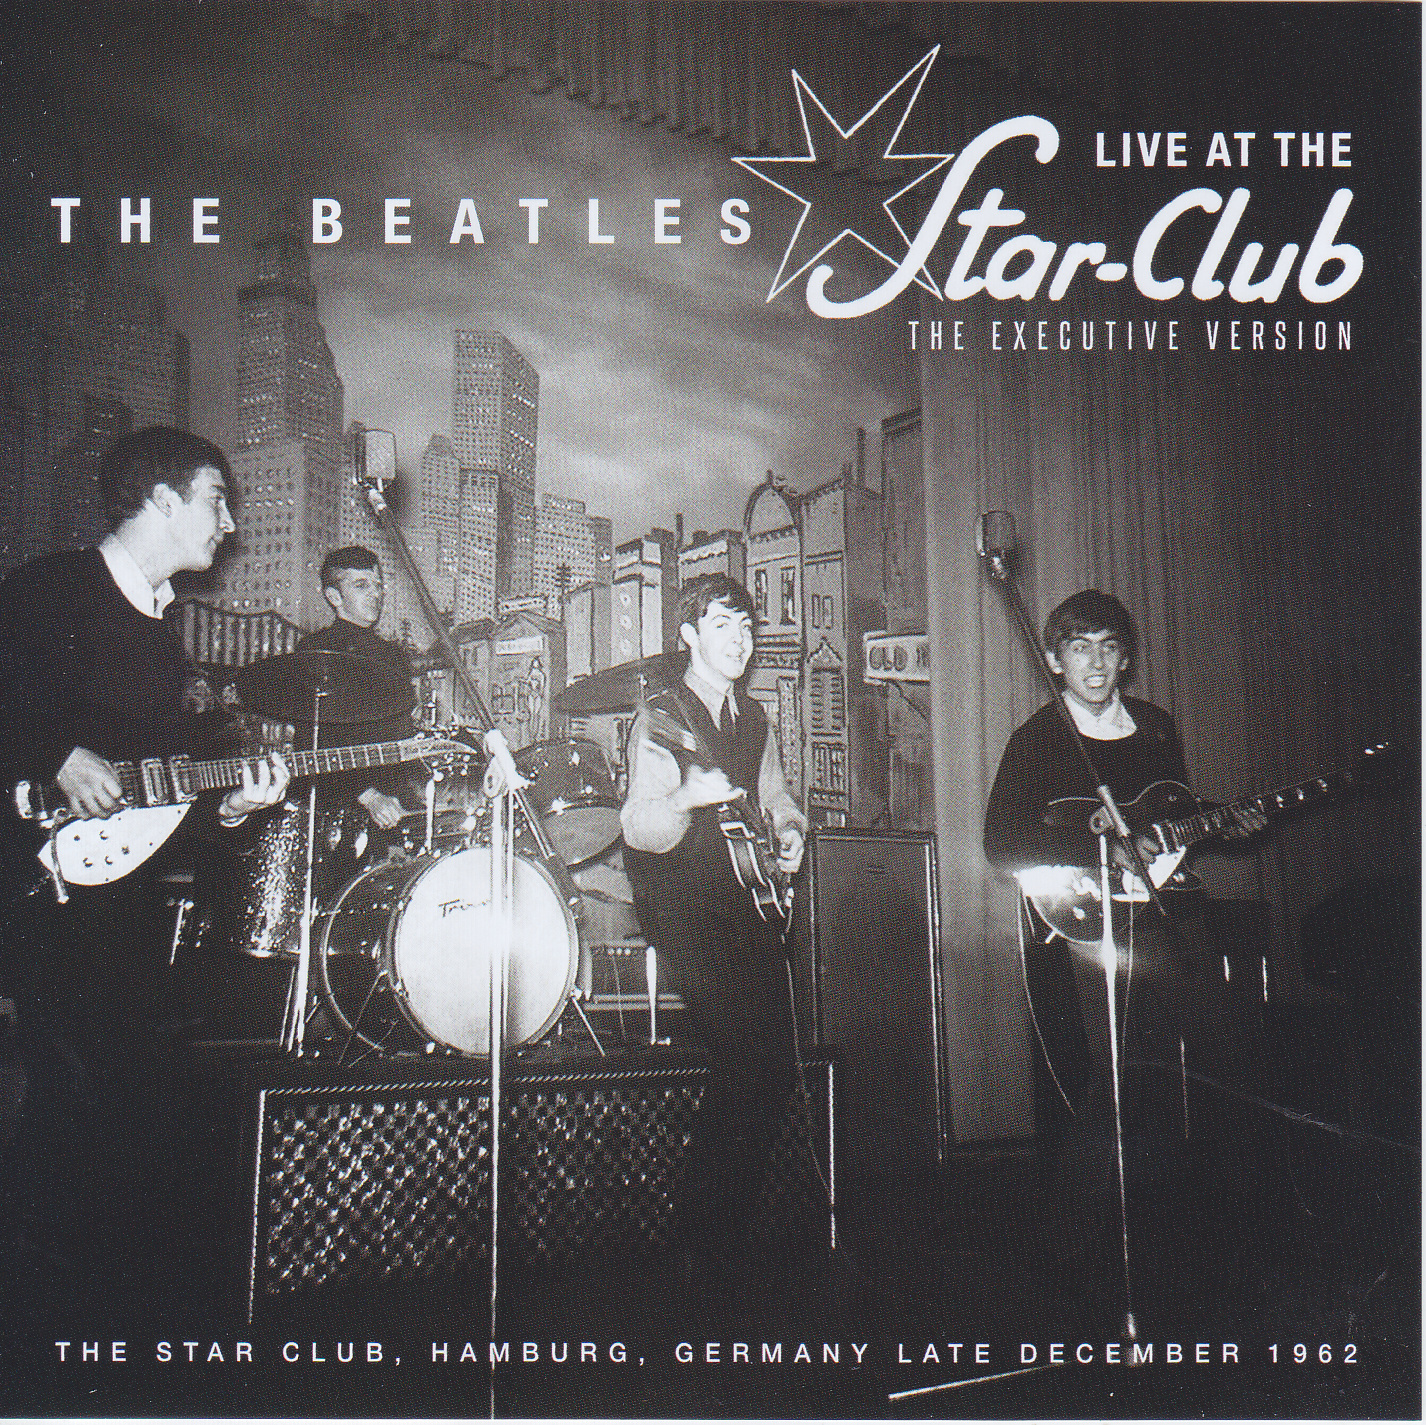 Beatles / Live At The Star Club The Executive Version / 2CD 